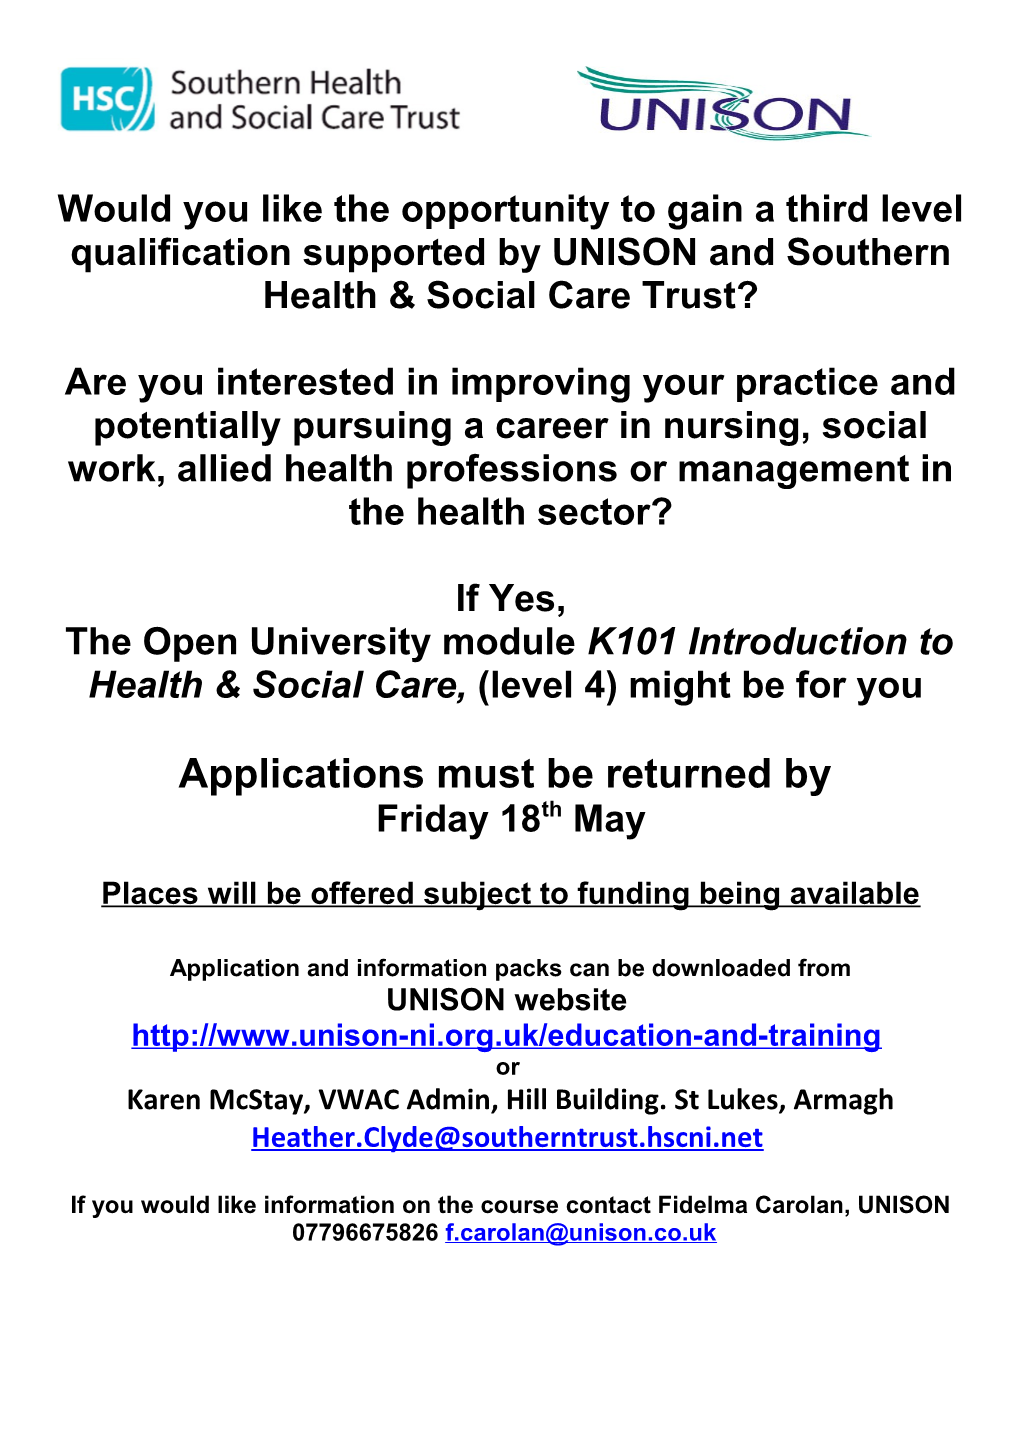 The Open University Module K101introduction to Health & Social Care,(Level 4)Might Be for You